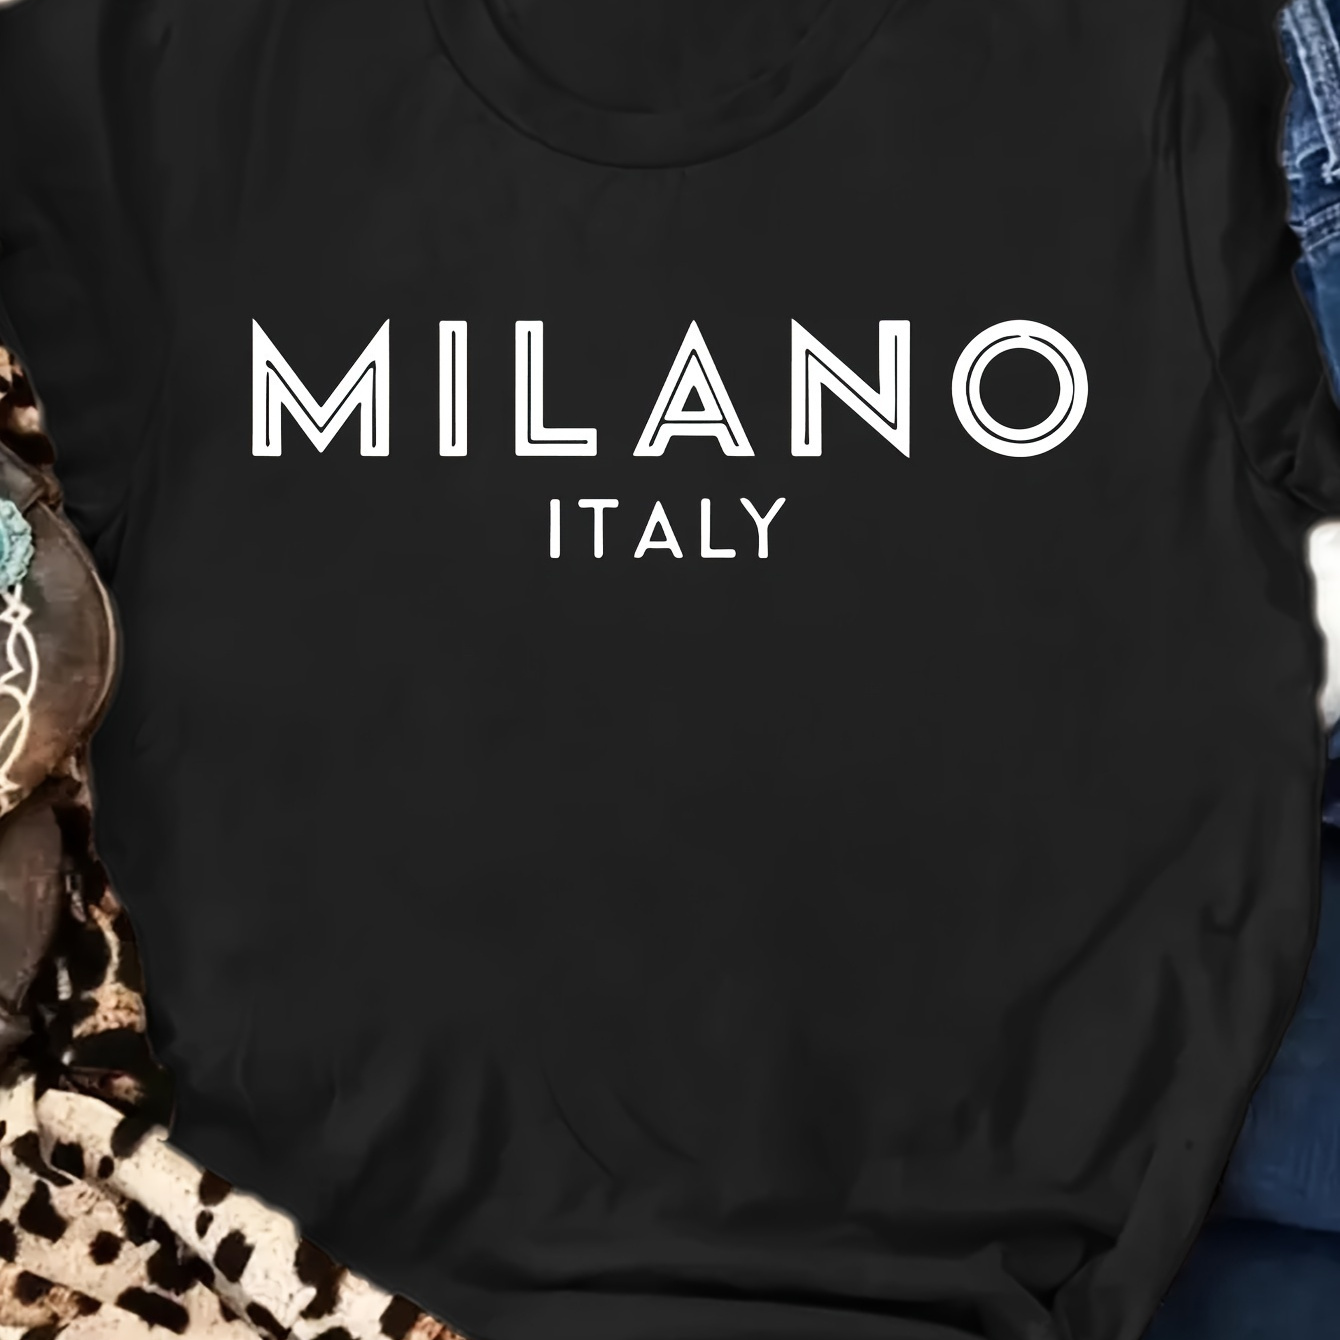 

Milano Italy Print Crew Neck T-shirt, Casual Short Sleeve Top For Spring & Summer, Women's Clothing